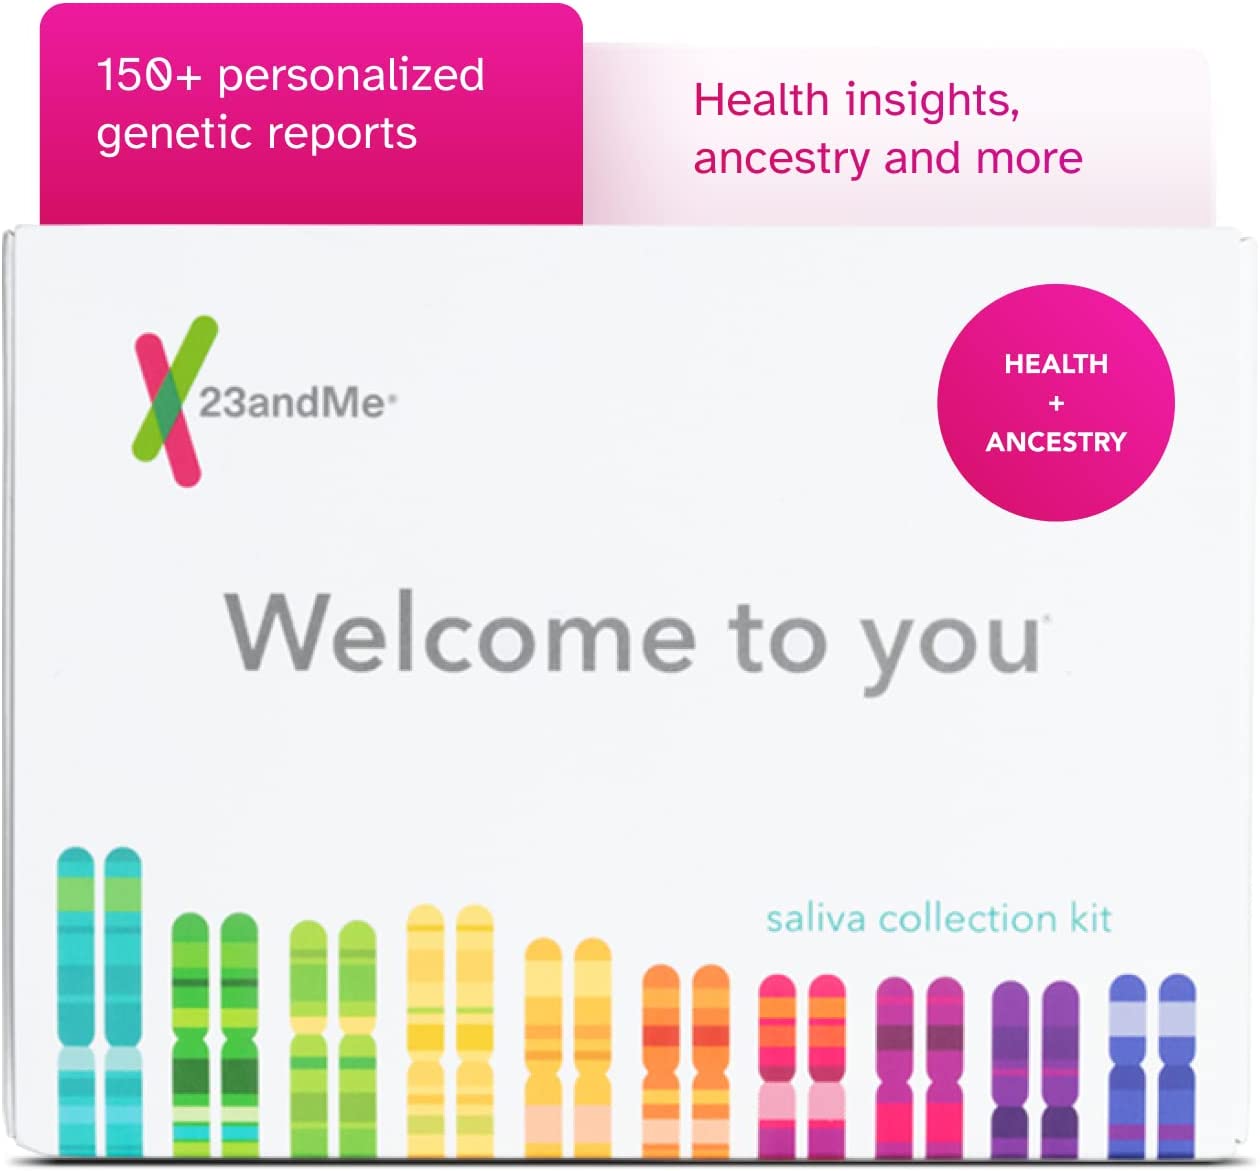 UNBELIEVABLE! 50% off on 23andMe Health + Ancestry Service Personal Genetic DNA Test - regularly $199 USD, TODAY ONLY just $99 USD! Don’t let this deal pass you by!